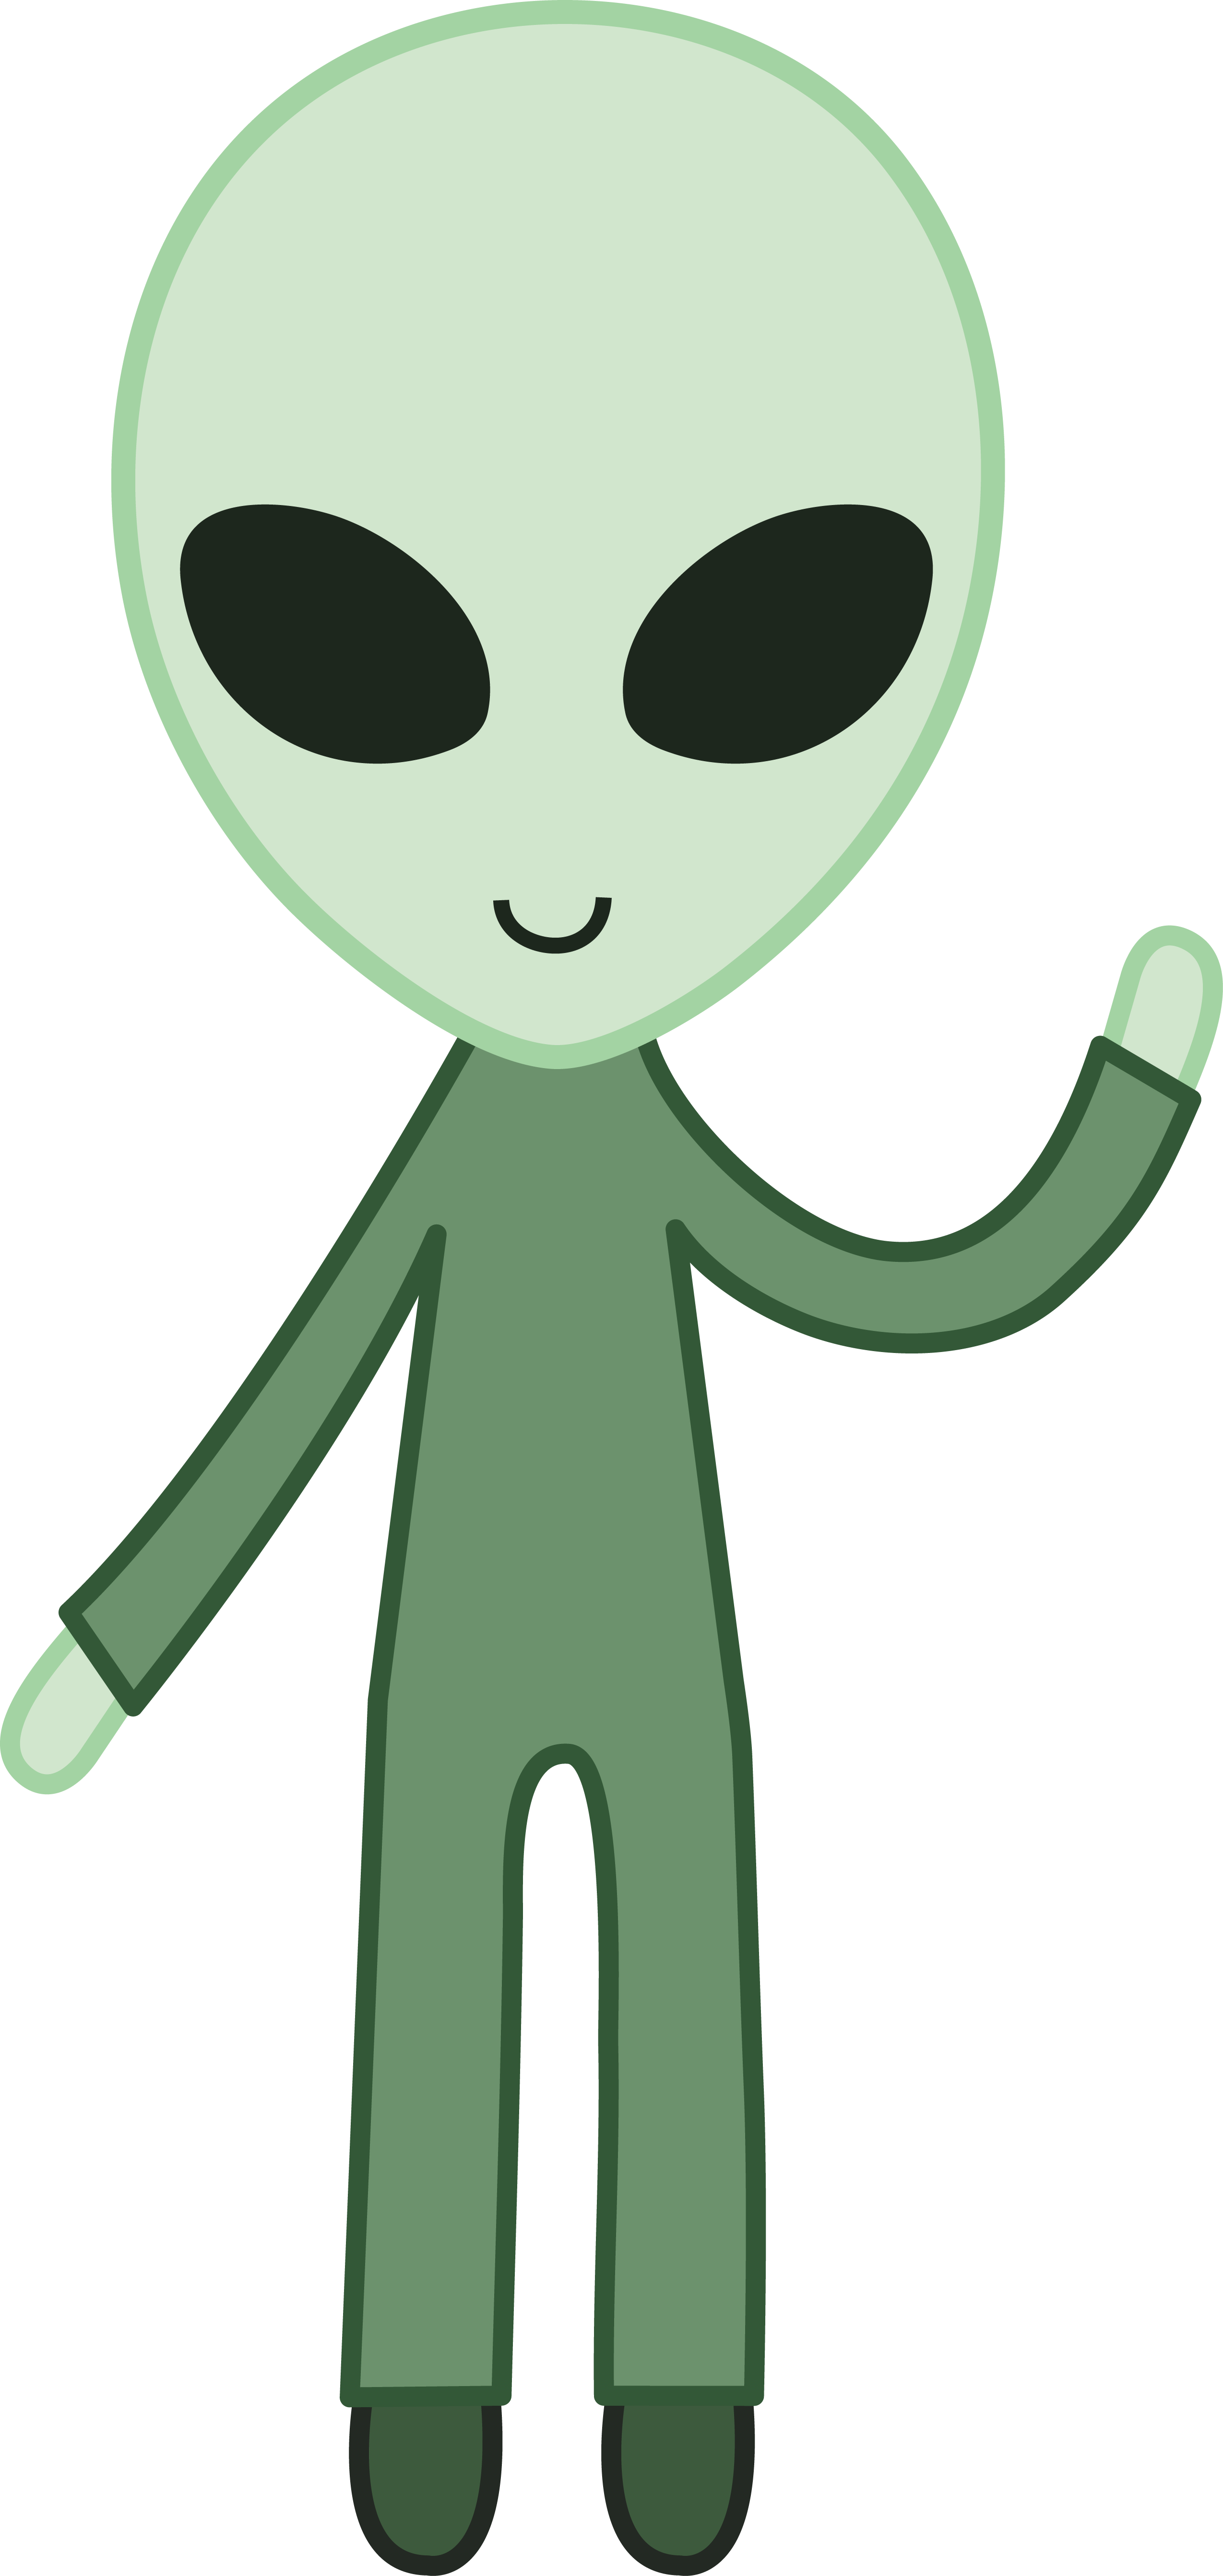 Electricity clipart kid. Friendly green space alien